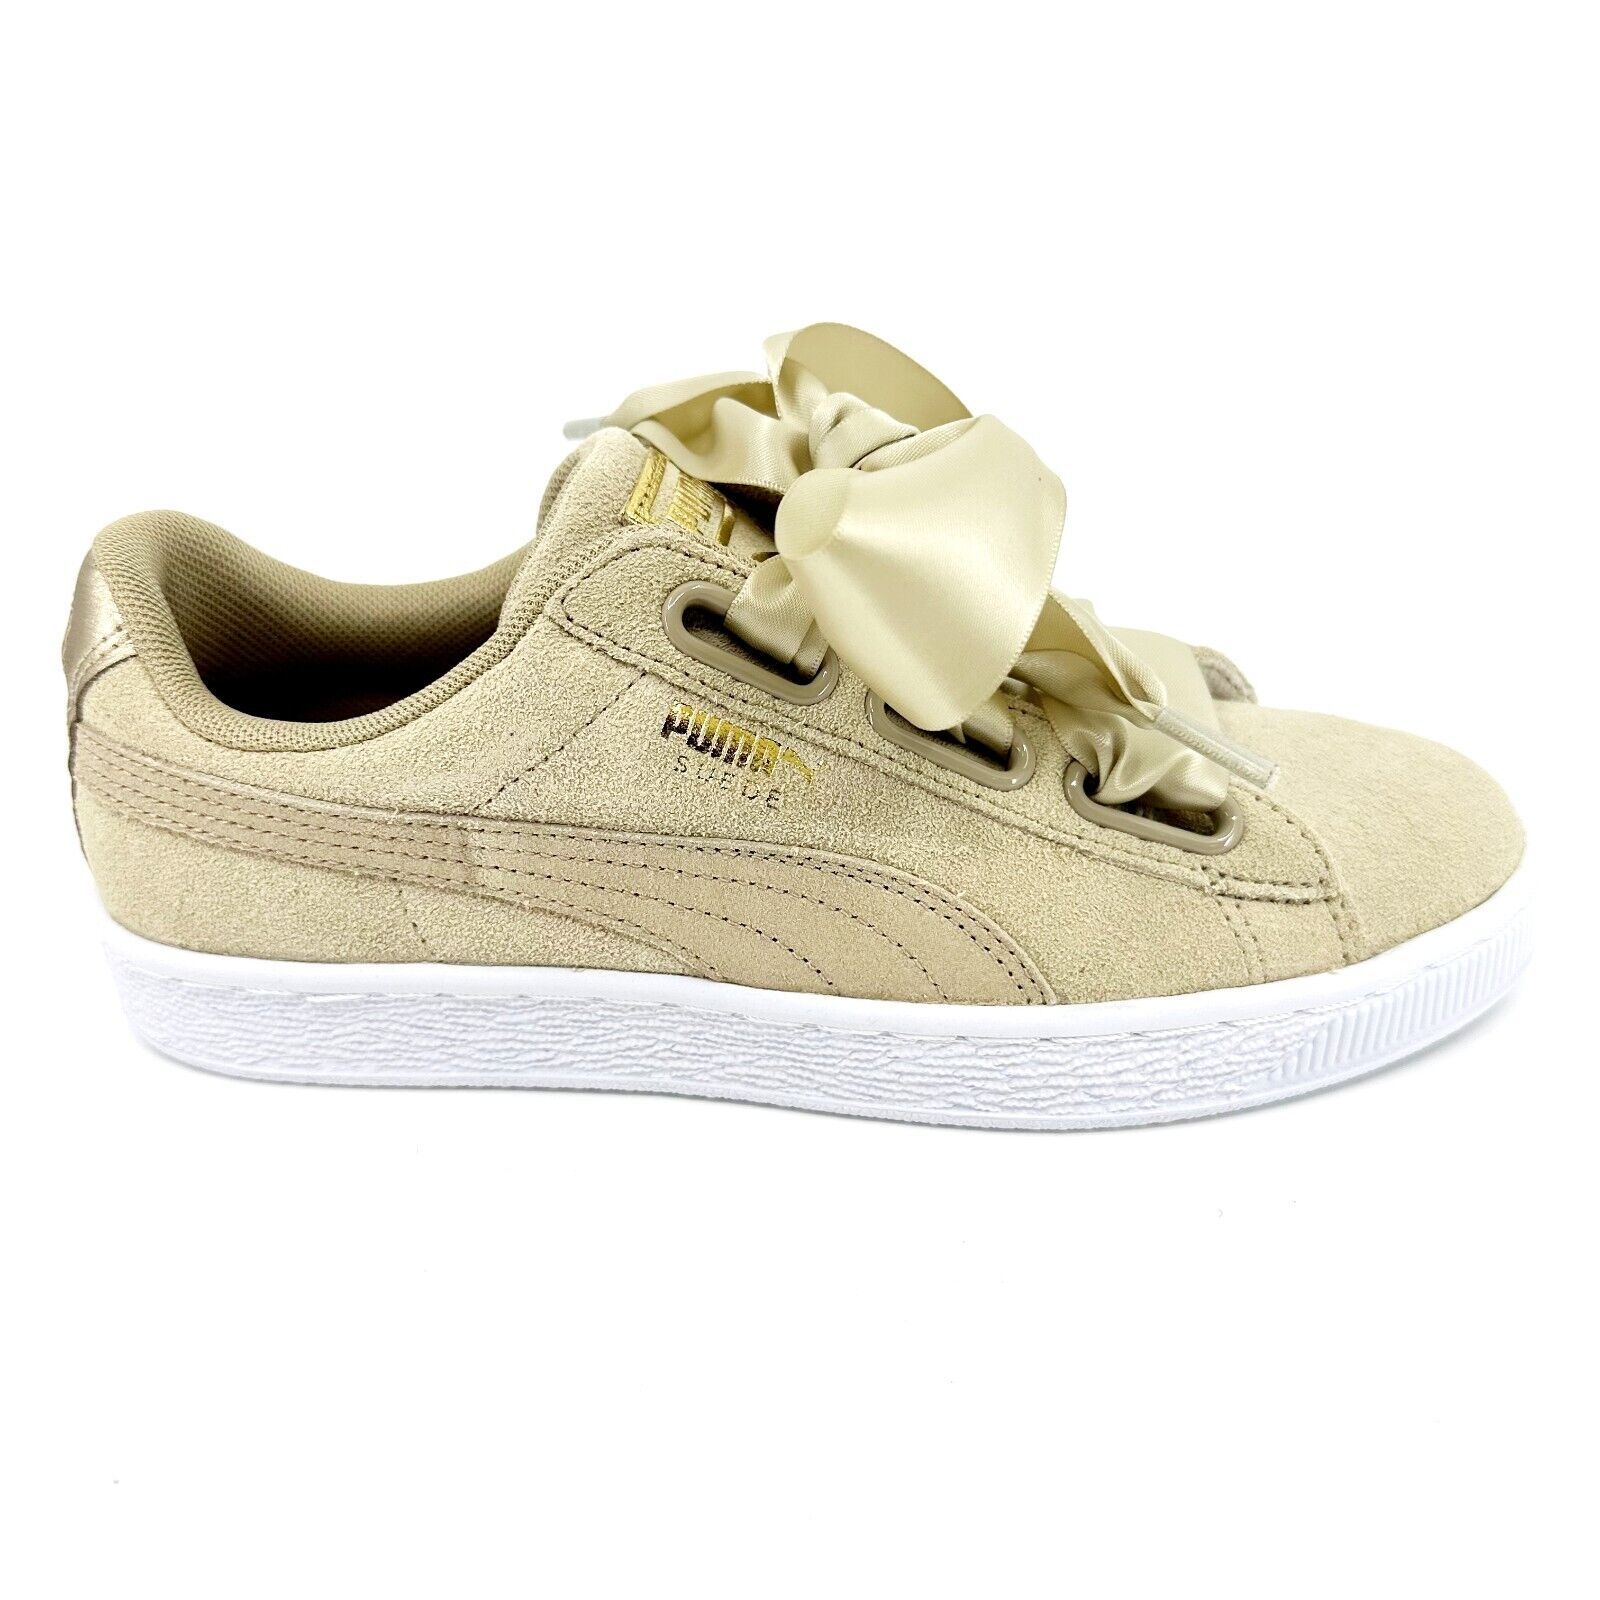 Primary image for Puma Suede Heart Safari Beige Womens Size 7.5 Casual Sneakers 364083 01